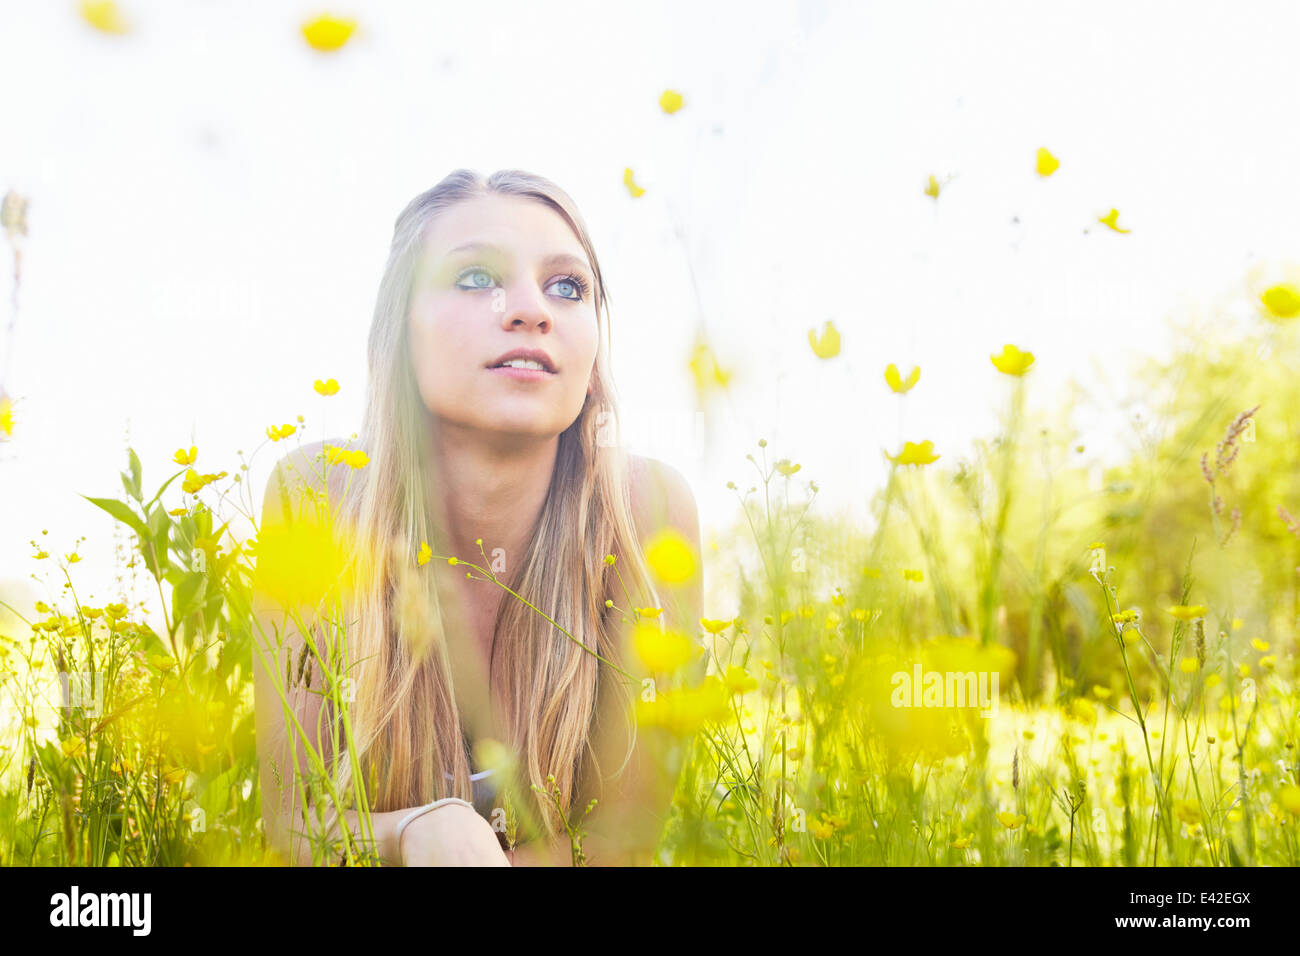 Young woman with long blonde hair, portrait Stock Photo